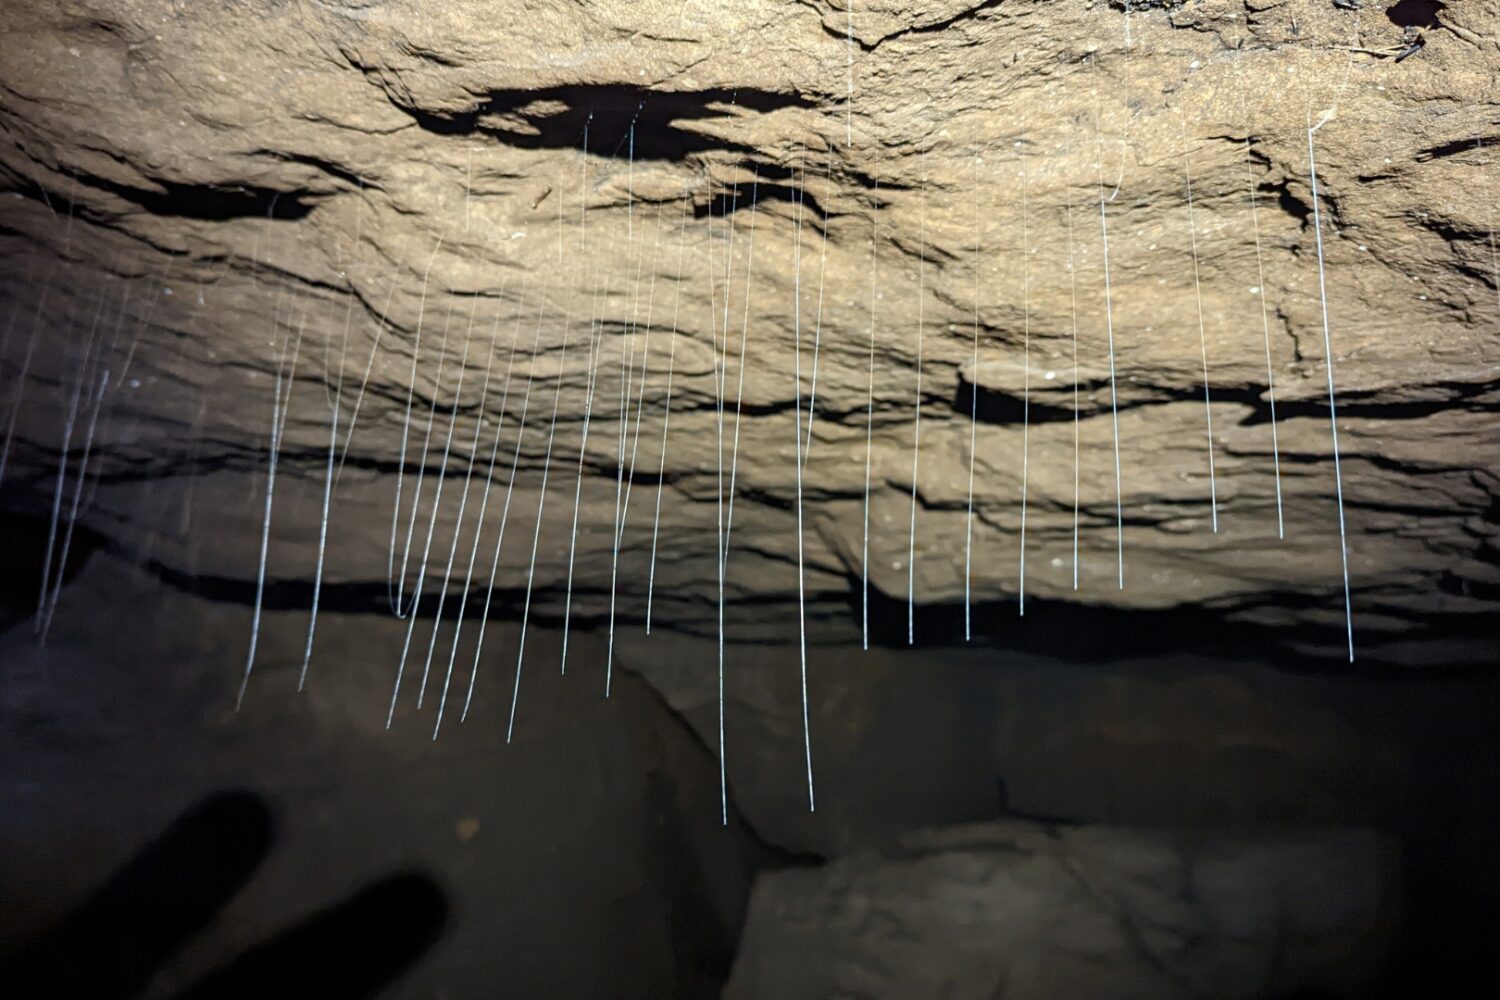 Stalactite and Stalagmite formation in Krem Mawpun, learn more about nature with the ChaloHoppo short escape.